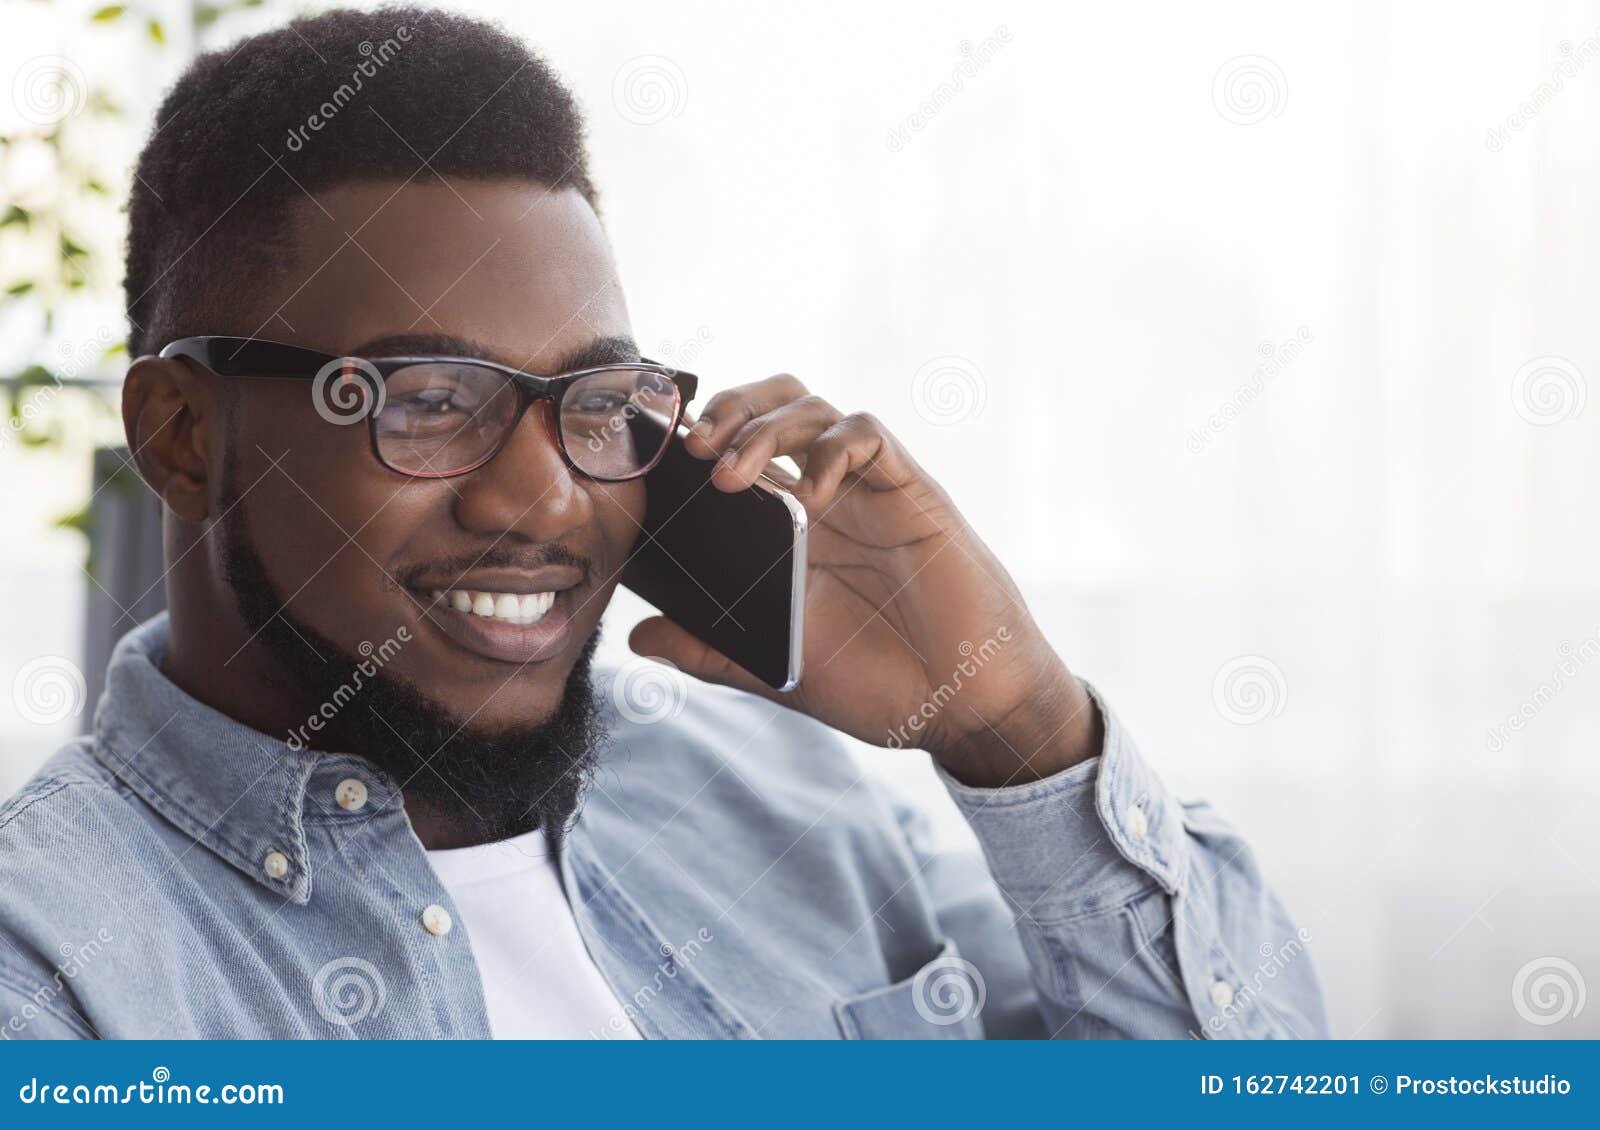 portrait-handsome-black-guy-glasses-talking-cellphone-touch-african-american-man-somebody-copy-space-162742201.jpg